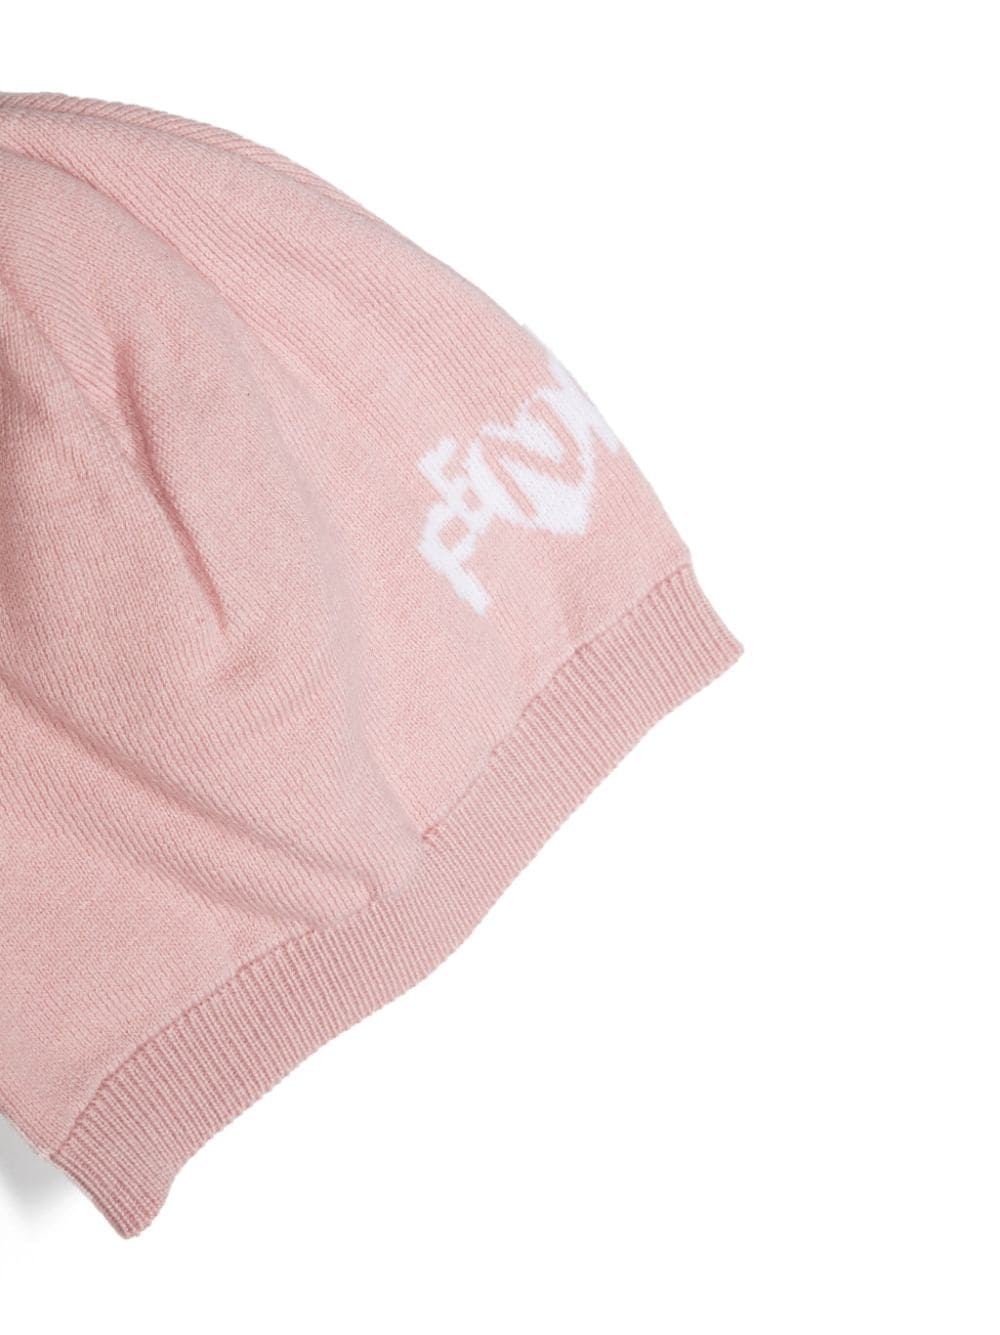 Light pink baby girl onesie with logo